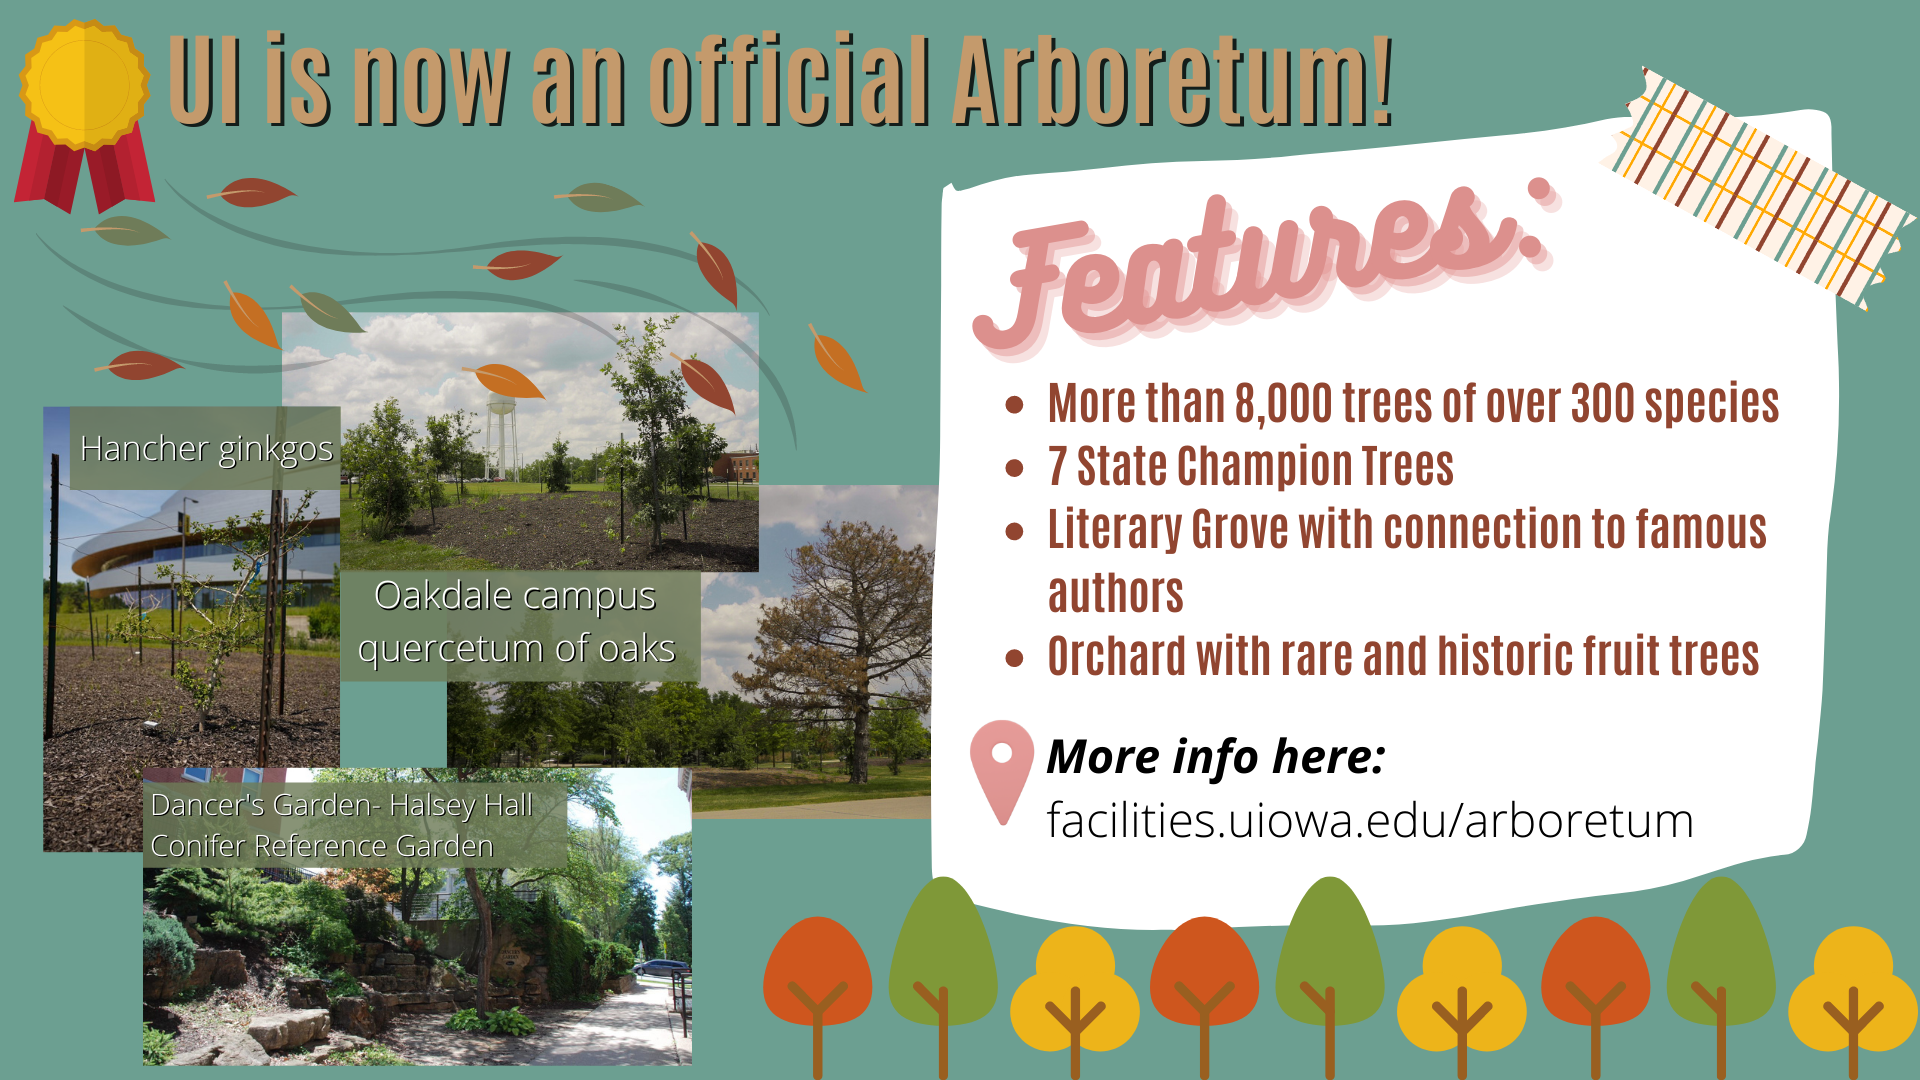 UI is now an official Arboretum!